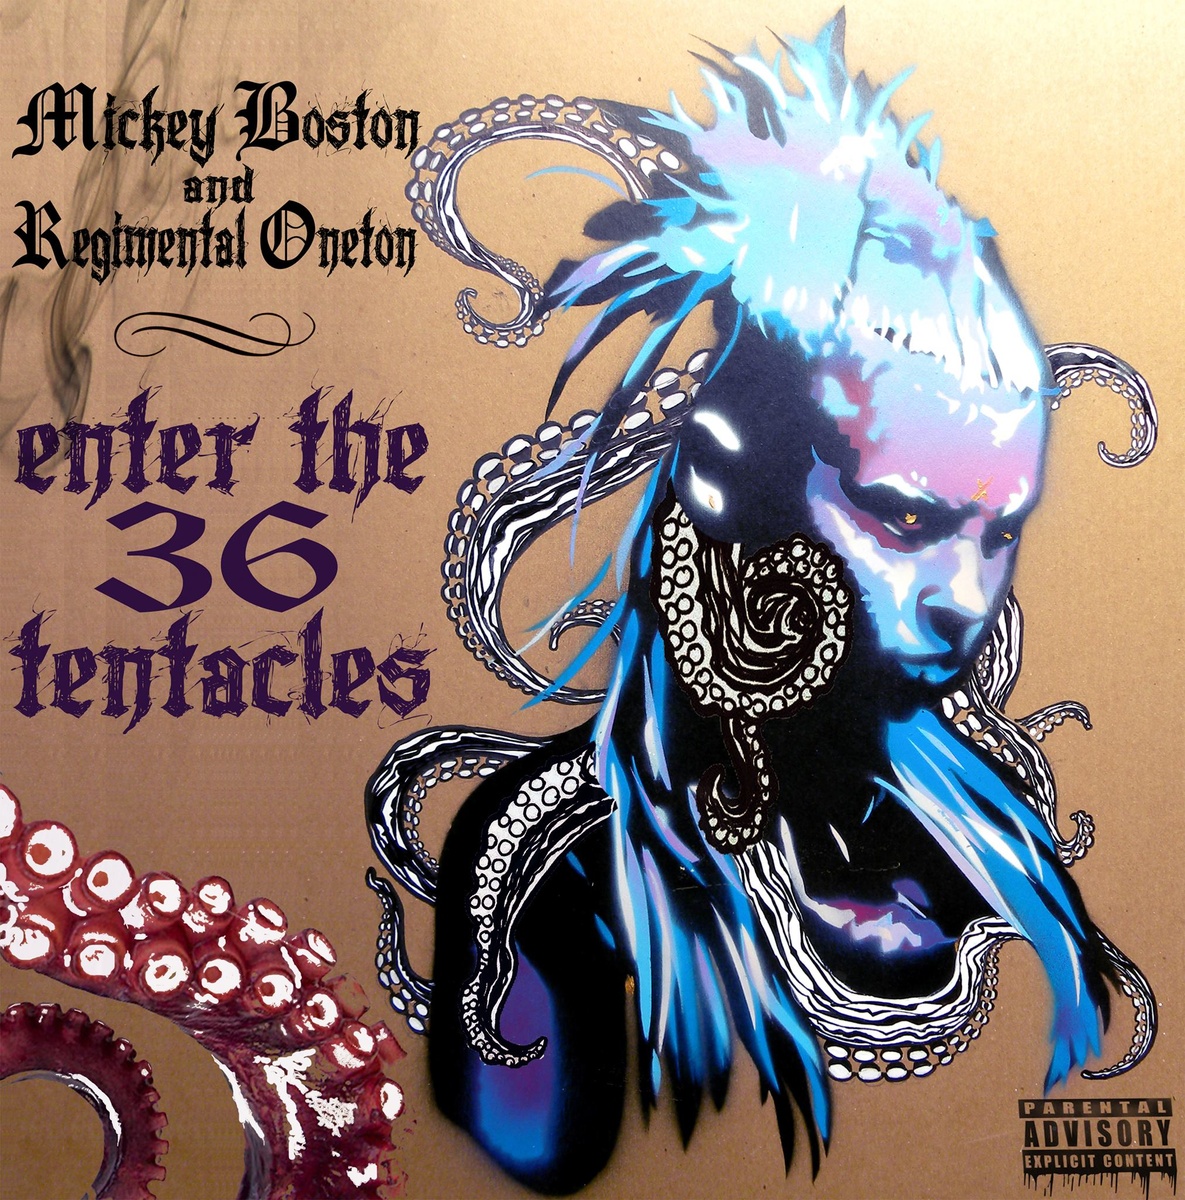 Mickey Boston and Regimental Oneton – Enter the 36 Tentacles